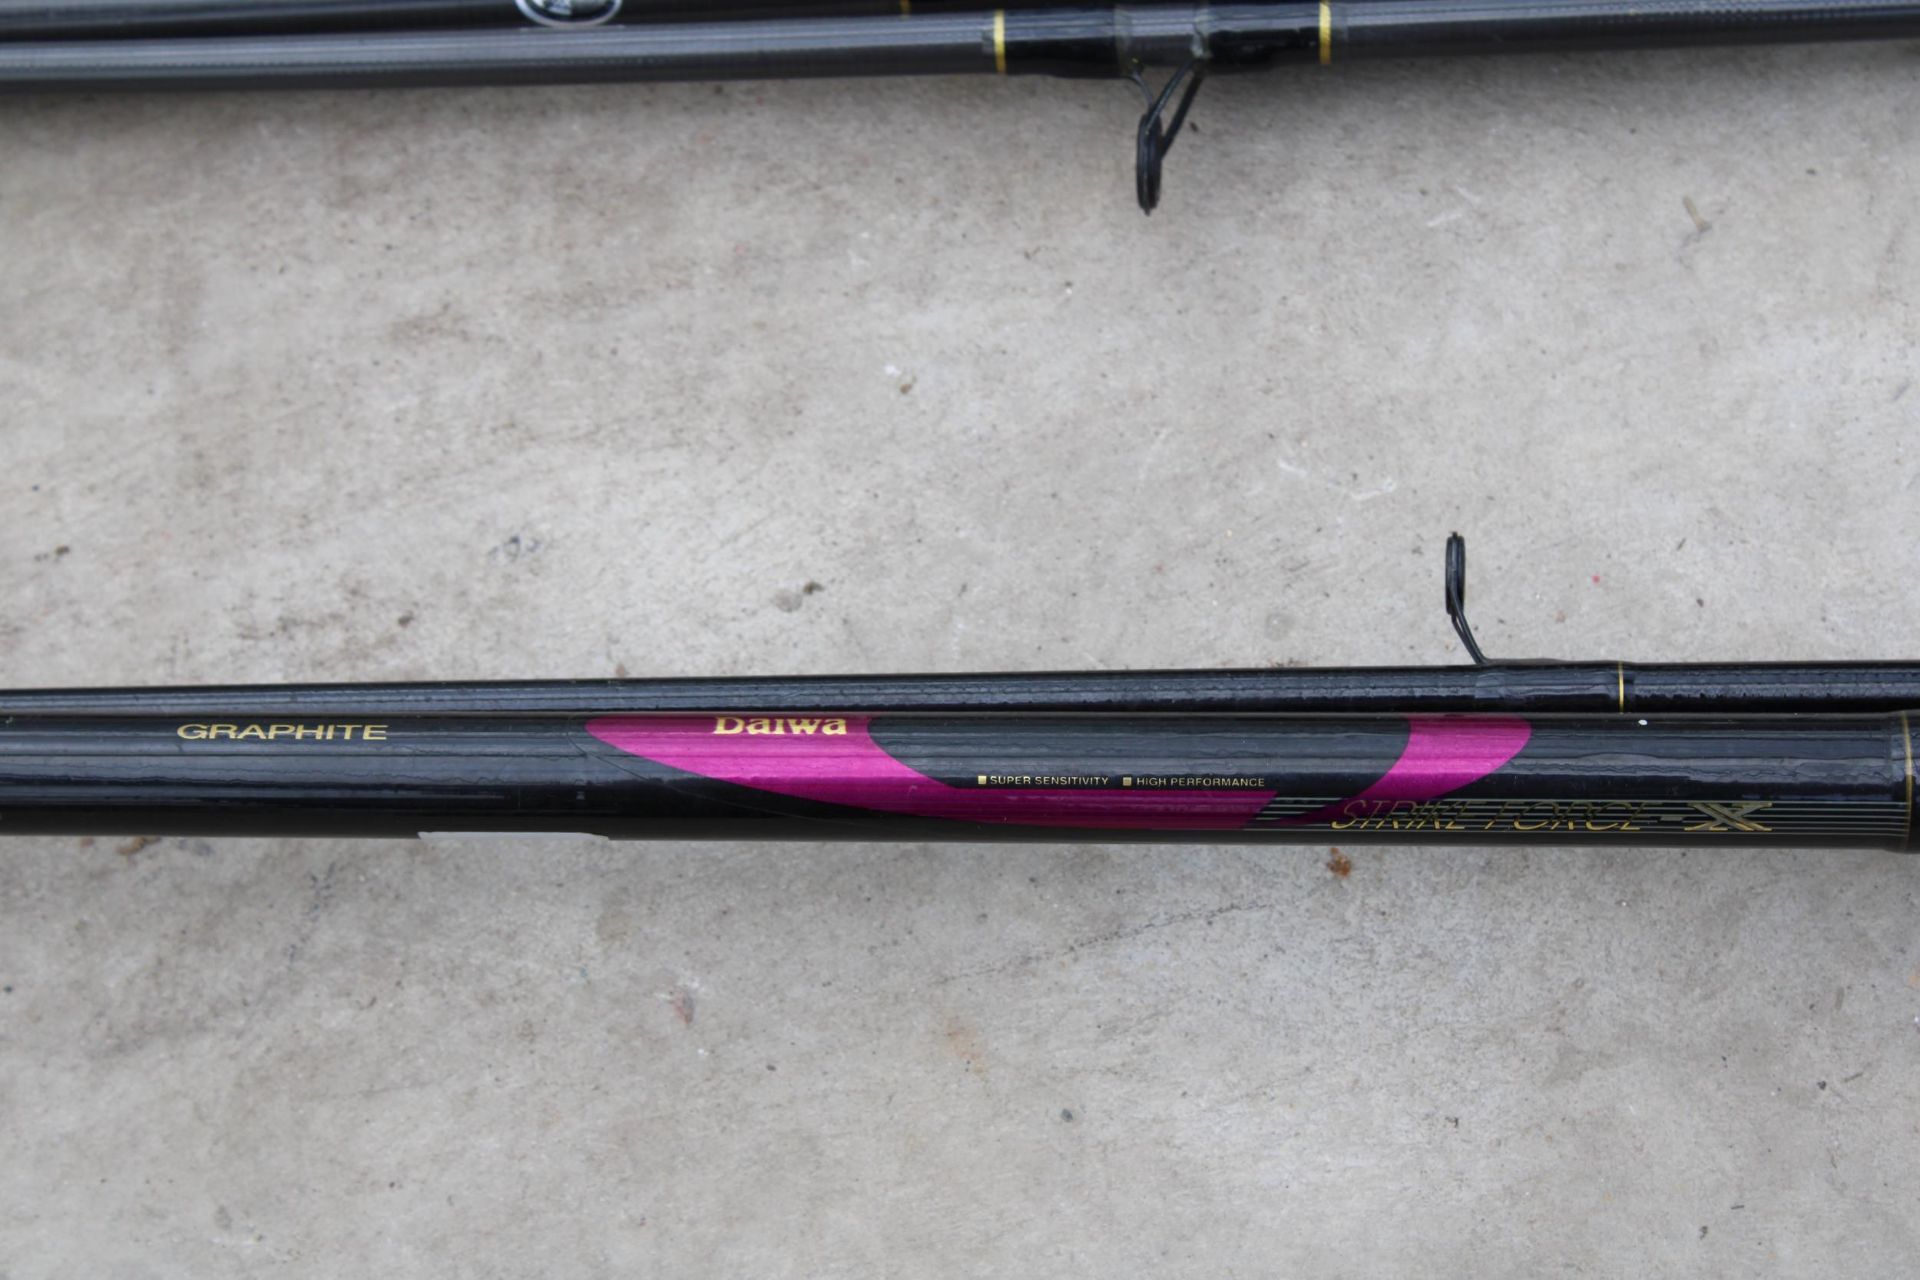 TWO CARP FISHING RODS TO INCLUDE AN ELEVEN FOOT CARBON STORM ROD AND A DAIWA GRAPHITE ROD - Image 2 of 3